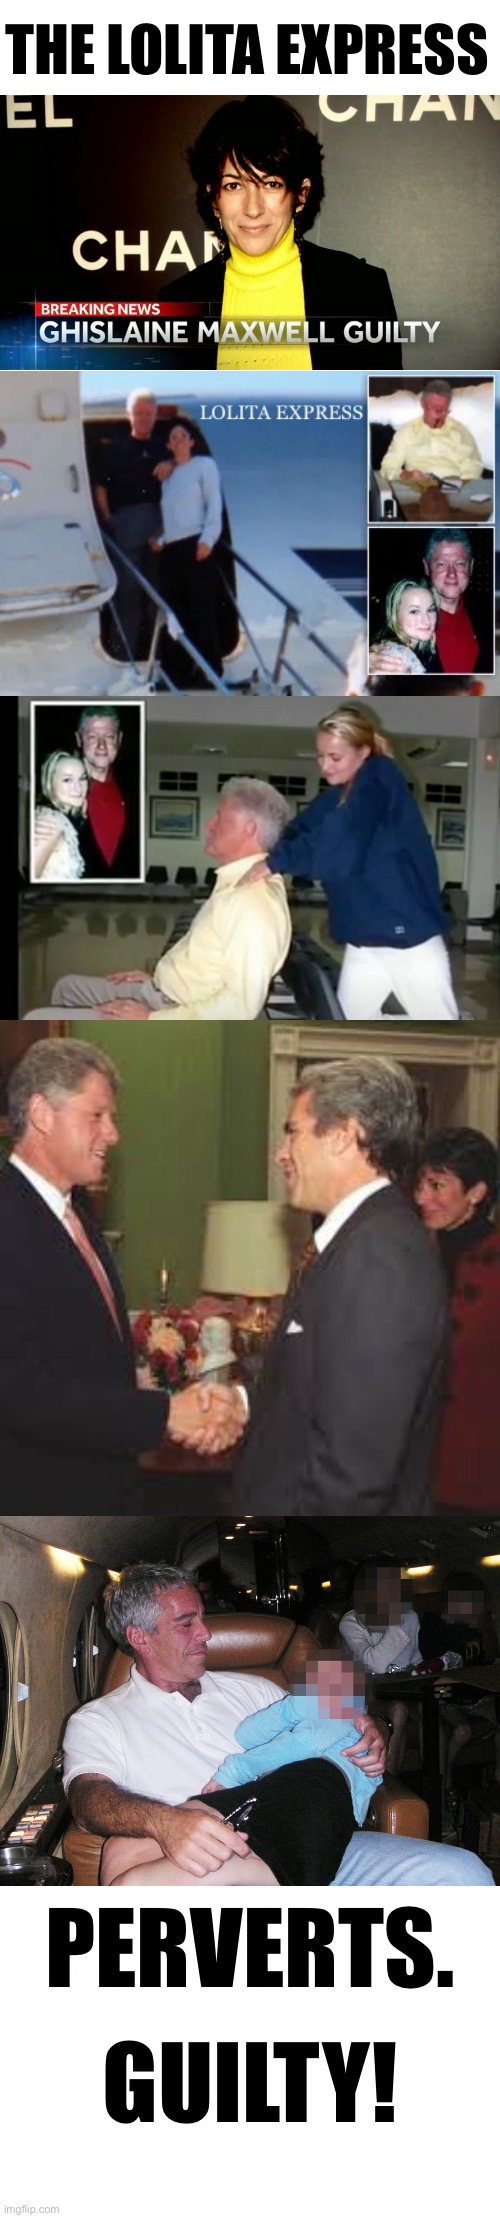 Now, Bill Clinton must be prosecuted for this proven child trafficking crime. | THE LOLITA EXPRESS; PERVERTS. GUILTY! | image tagged in bill clinton,clinton,bill clinton scared,bill clinton - sexual relations,inappropriate bill clinton,pedophile | made w/ Imgflip meme maker